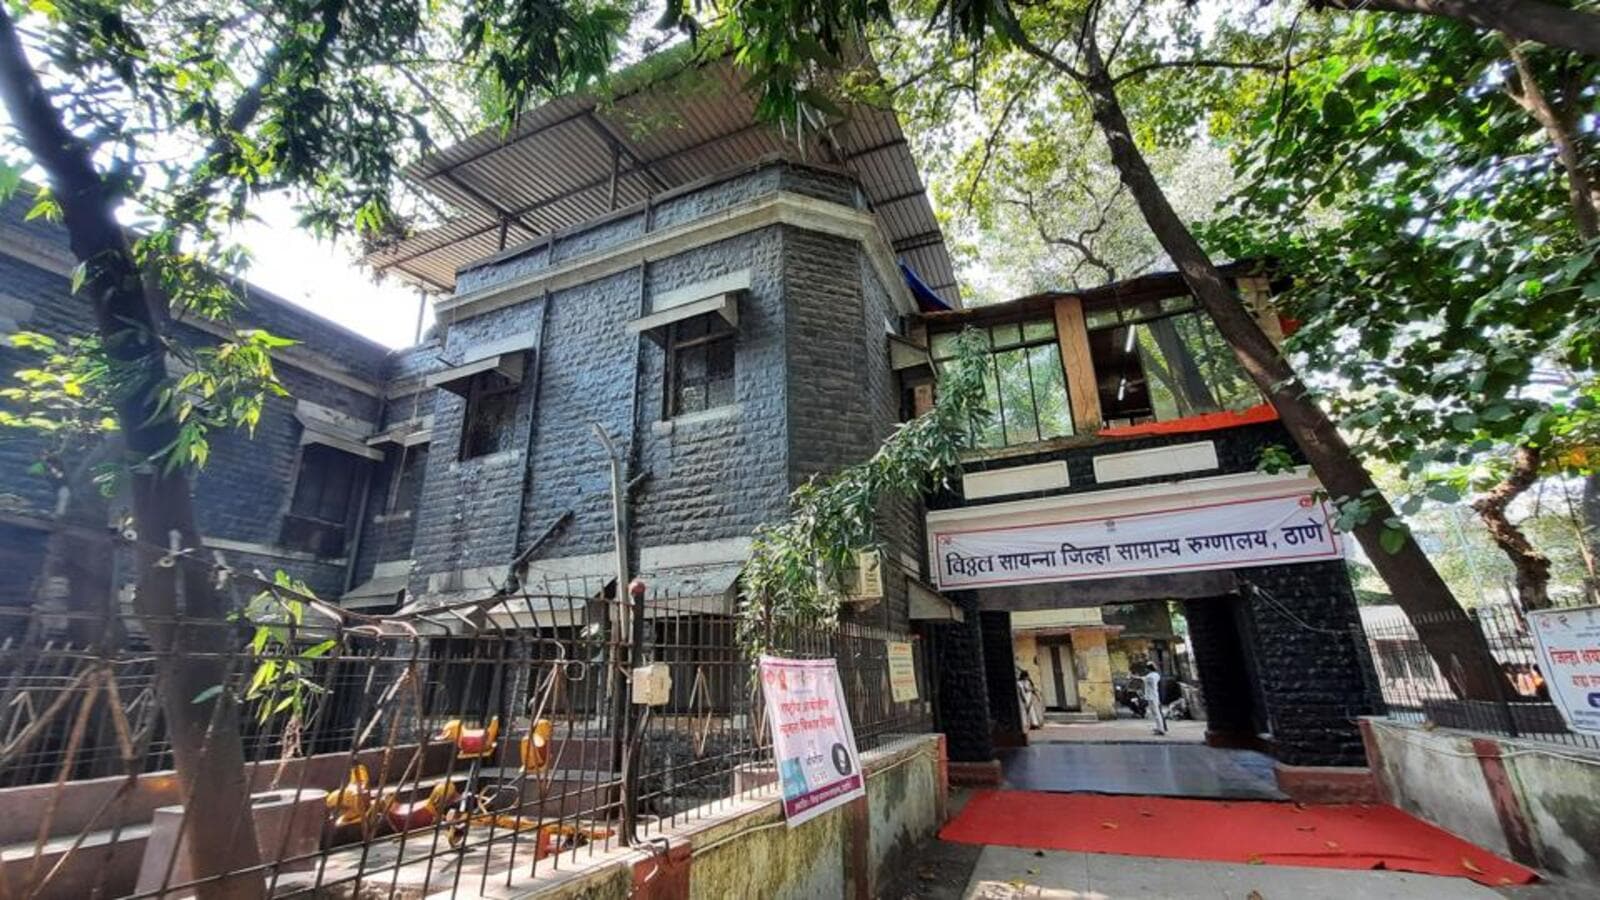 demolition-of-thane-civil-hospital-the-many-stories-nestled-inside-the-86-year-old-british-era-structure